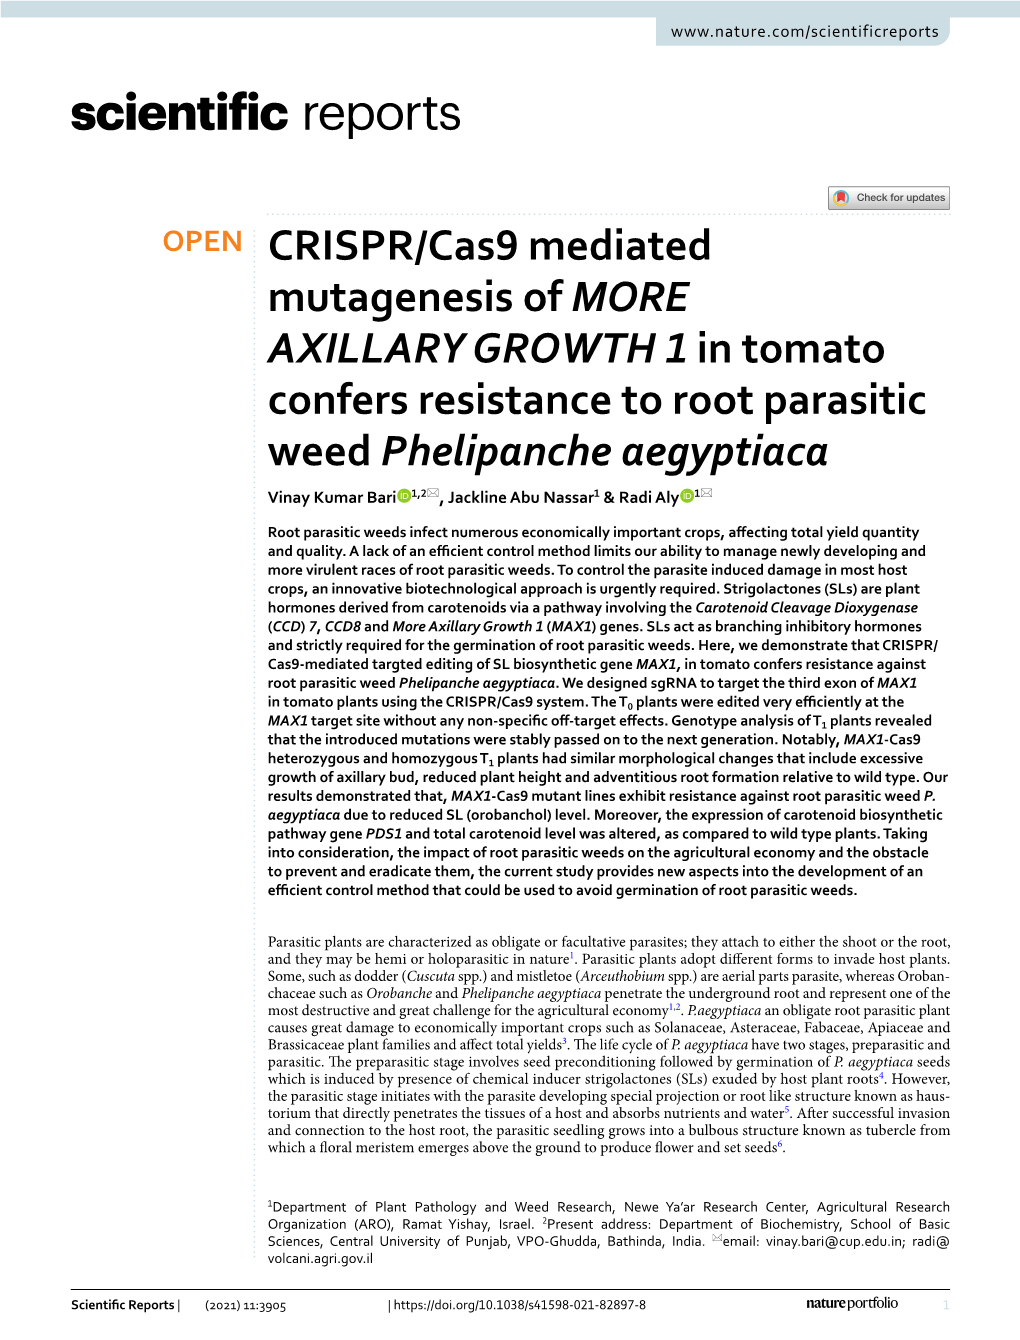 CRISPR/Cas9 Mediated Mutagenesis of MORE AXILLARY GROWTH 1 in Tomato Confers Resistance to Root Parasitic Weed Phelipanche Aegyp